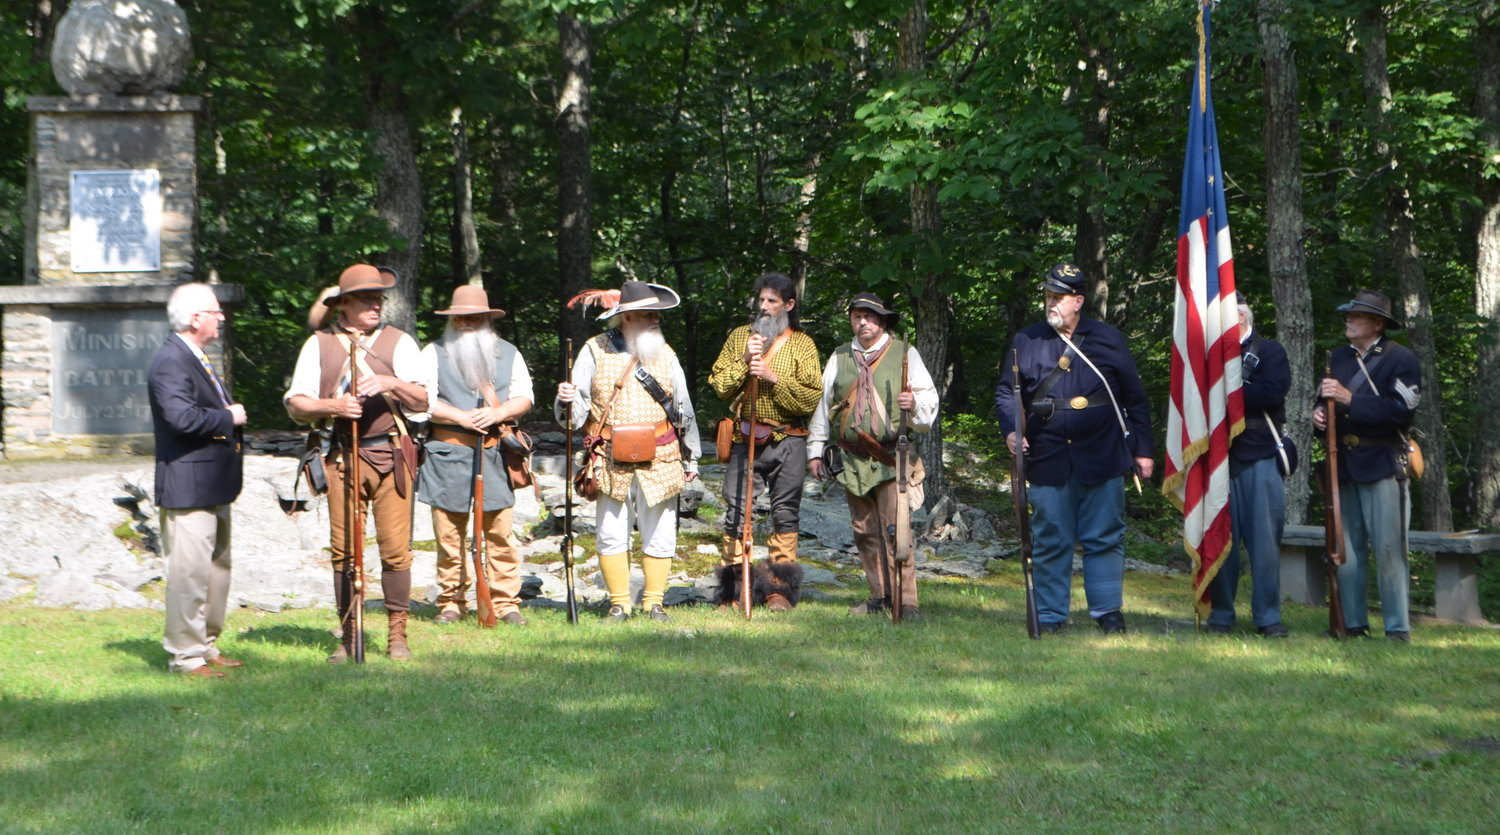 Sullivan County Historian John Conway, left, talks with members of the Navasing Long Rifles, the 5th NY Infantry, and the 143rd NYS Volunteer Infantry, prior to the presentation of the colors.